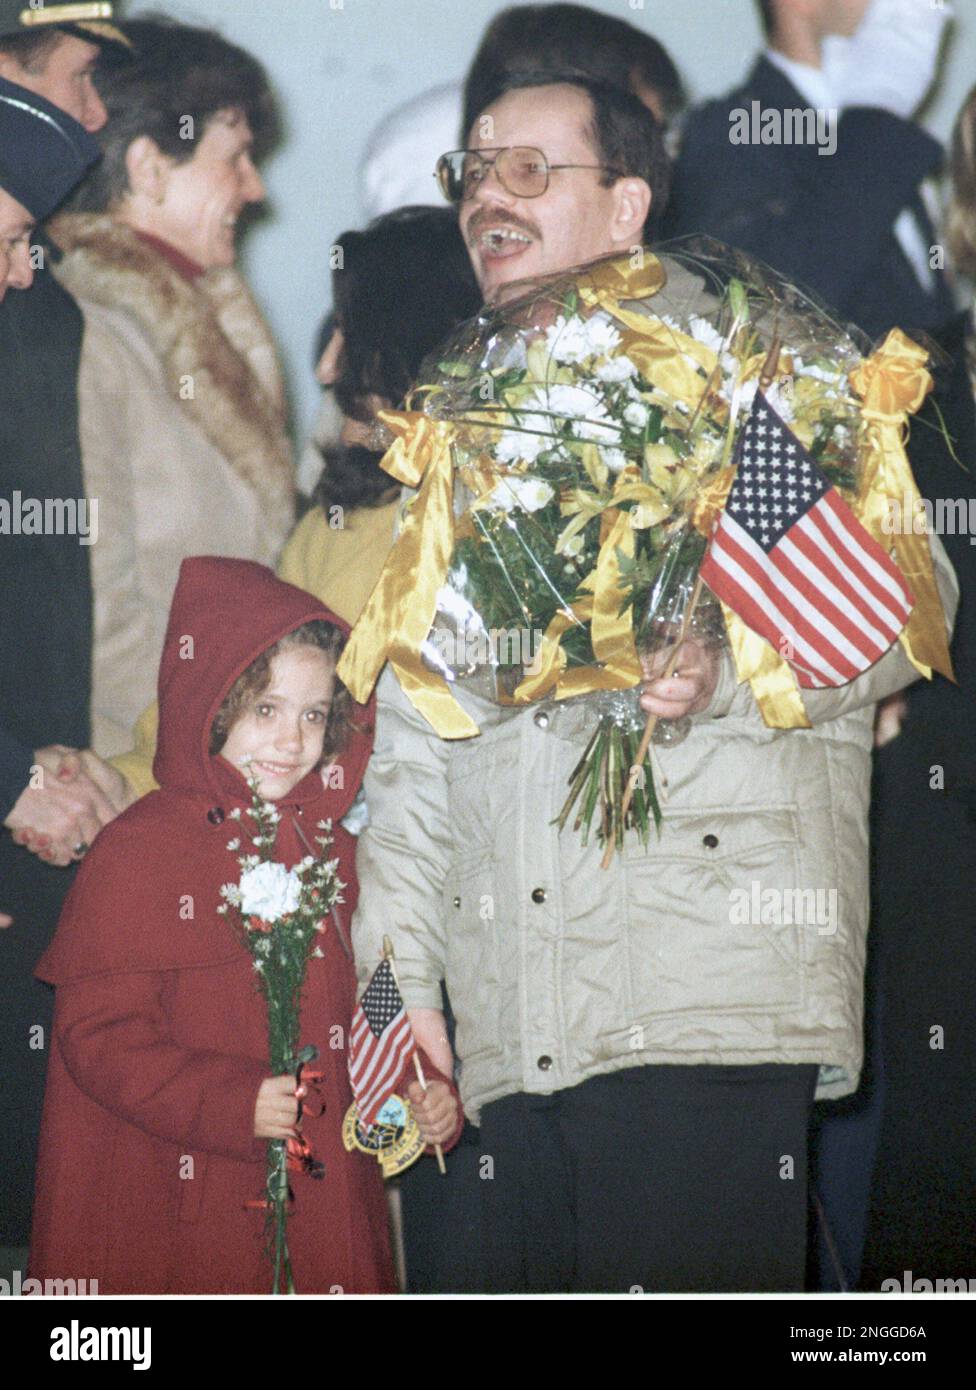 Freed hostage Terry Anderson, accompanied by his daughter Sulome, holds a bouquet of flowers and a small American flag upon arrival at Rheim Main air base outside Frankfurt, Germany, early Thursday, Dec. 5, 1991. Anderson was released Wednesday by his pro-Iranian captors after six-and-a-half years of captivity in Beirut, Lebanon. (AP Photo/Diether Endlicher) Stock Photo